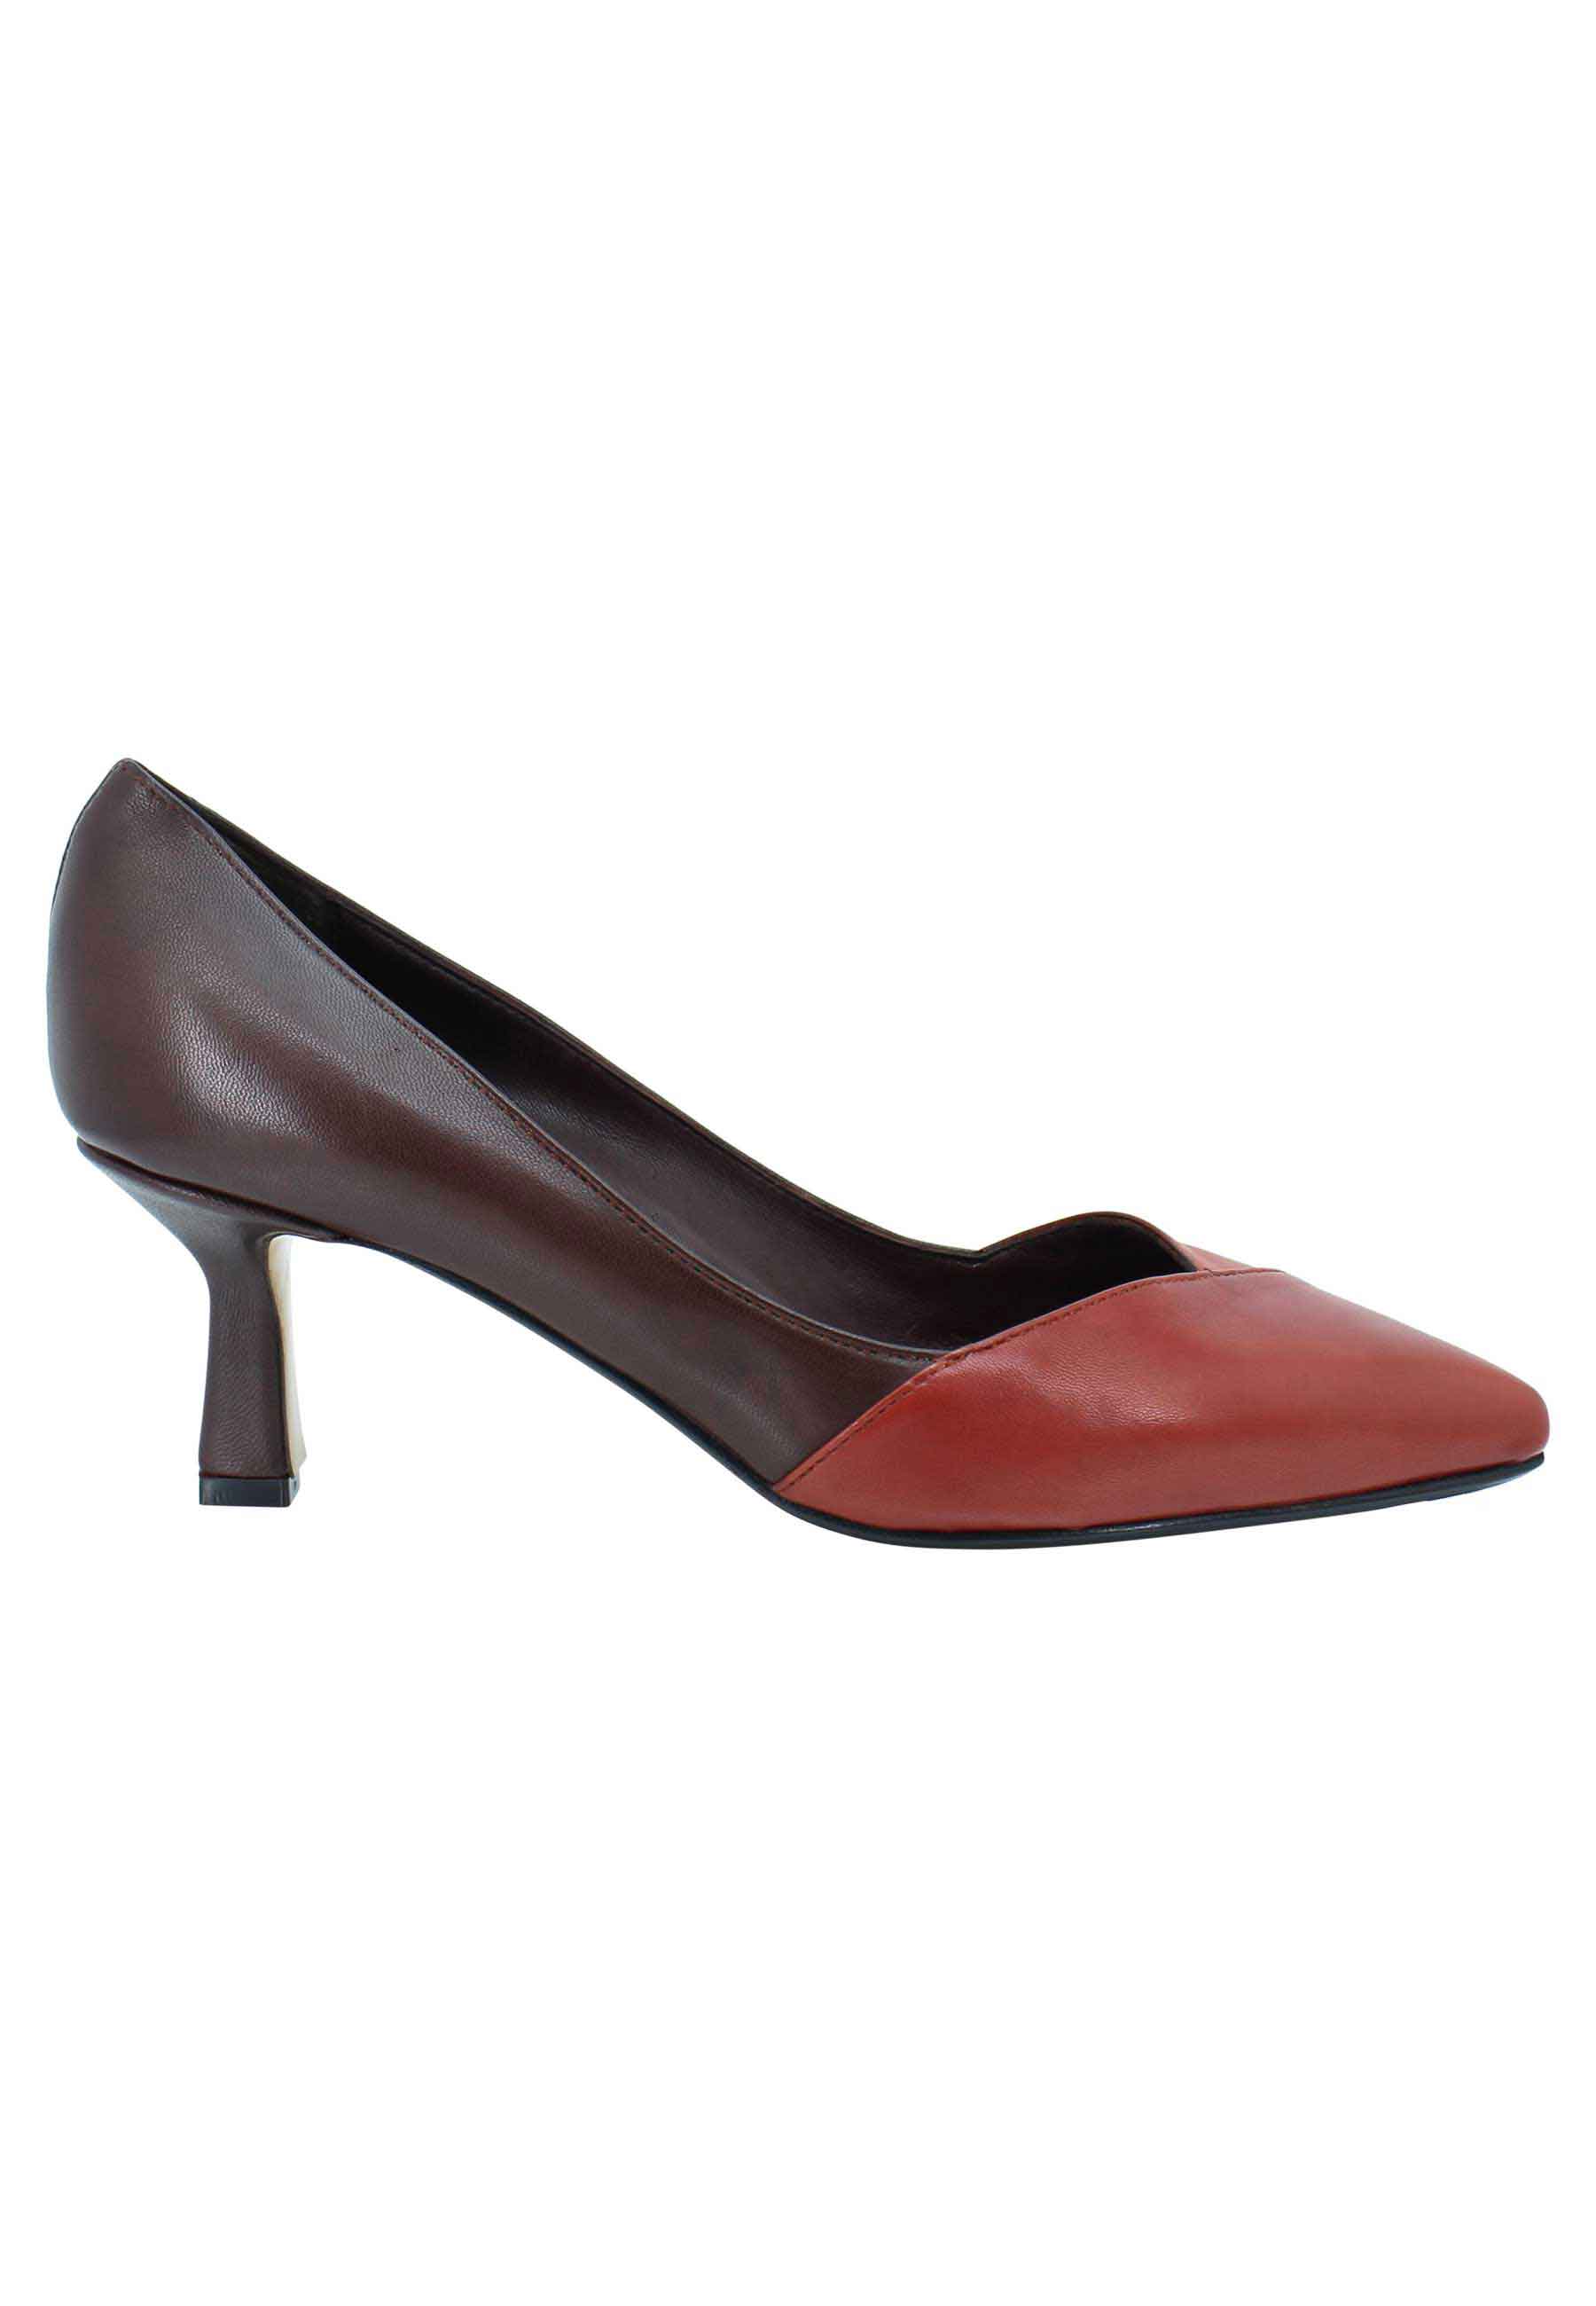 Women's decollete in two-tone brown leather and low heel brick